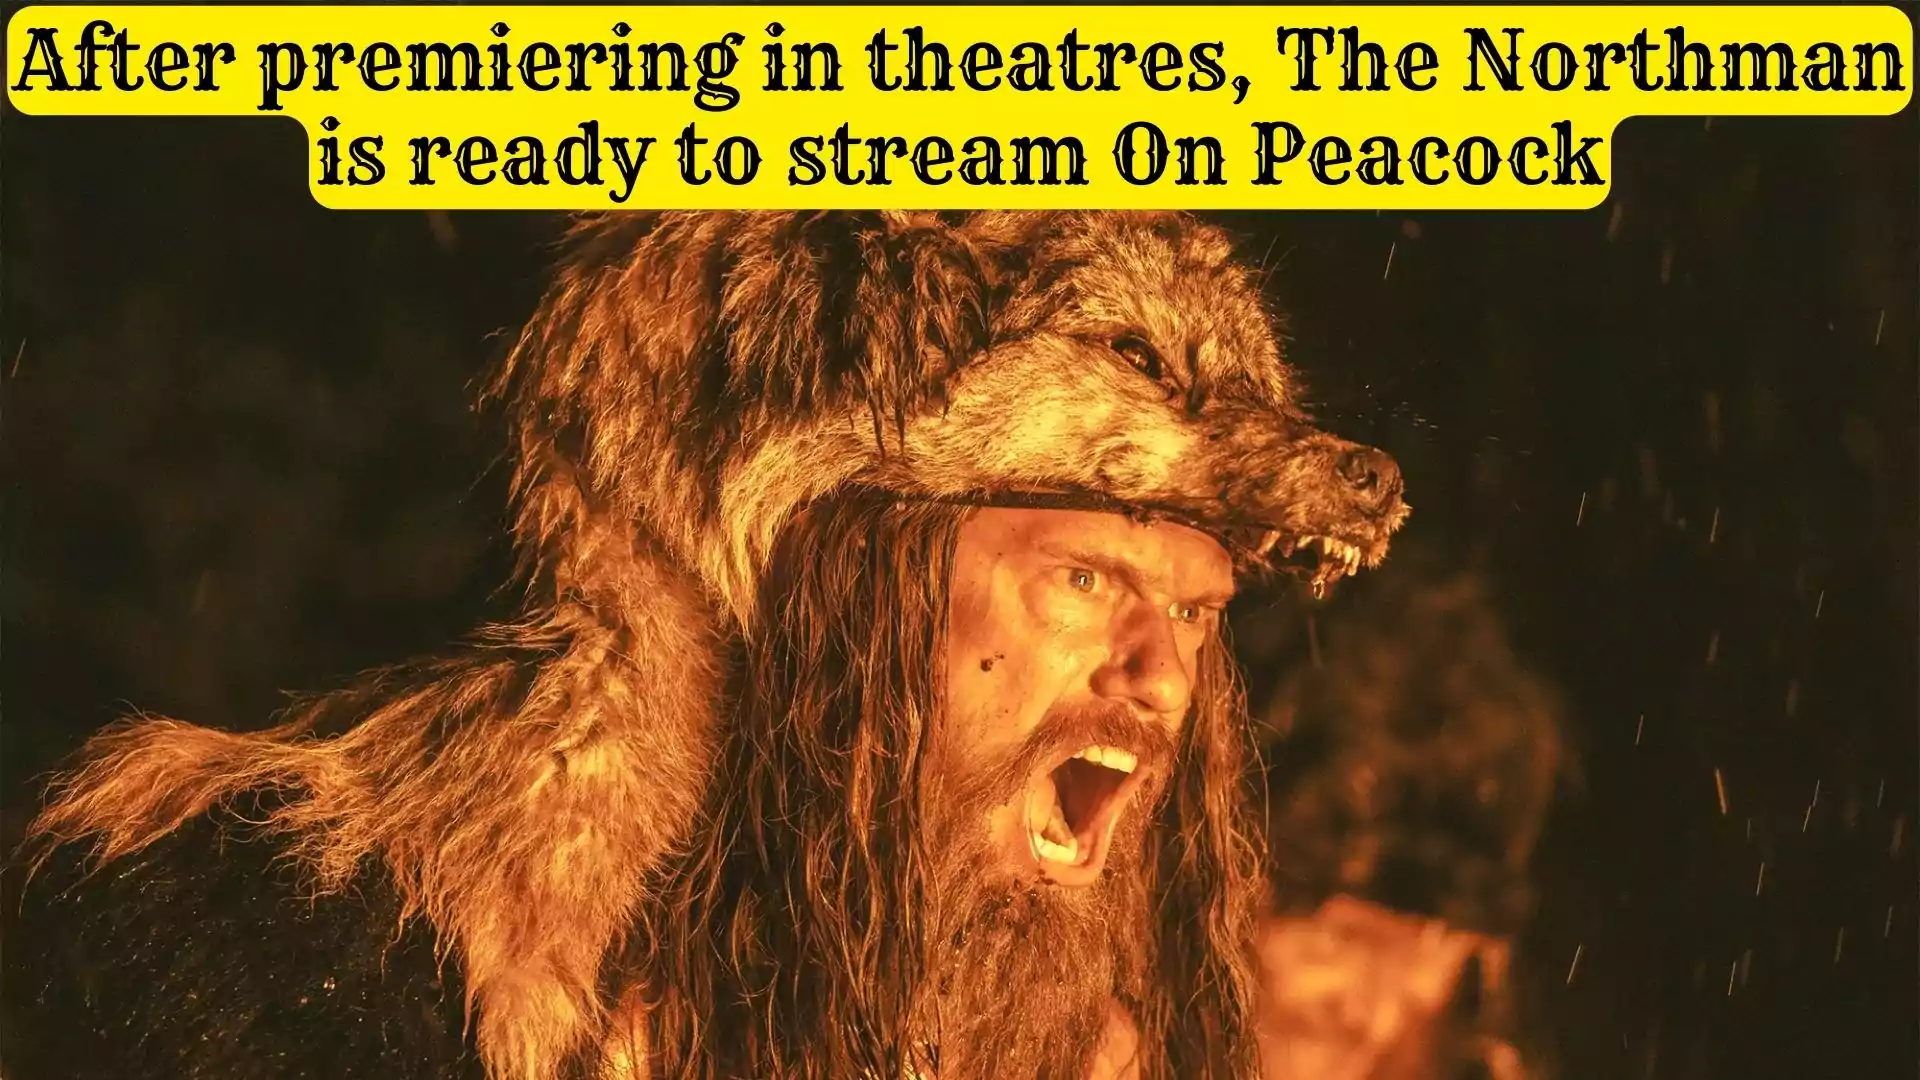 The Northman is ready to stream On Peacock | 2022 Film